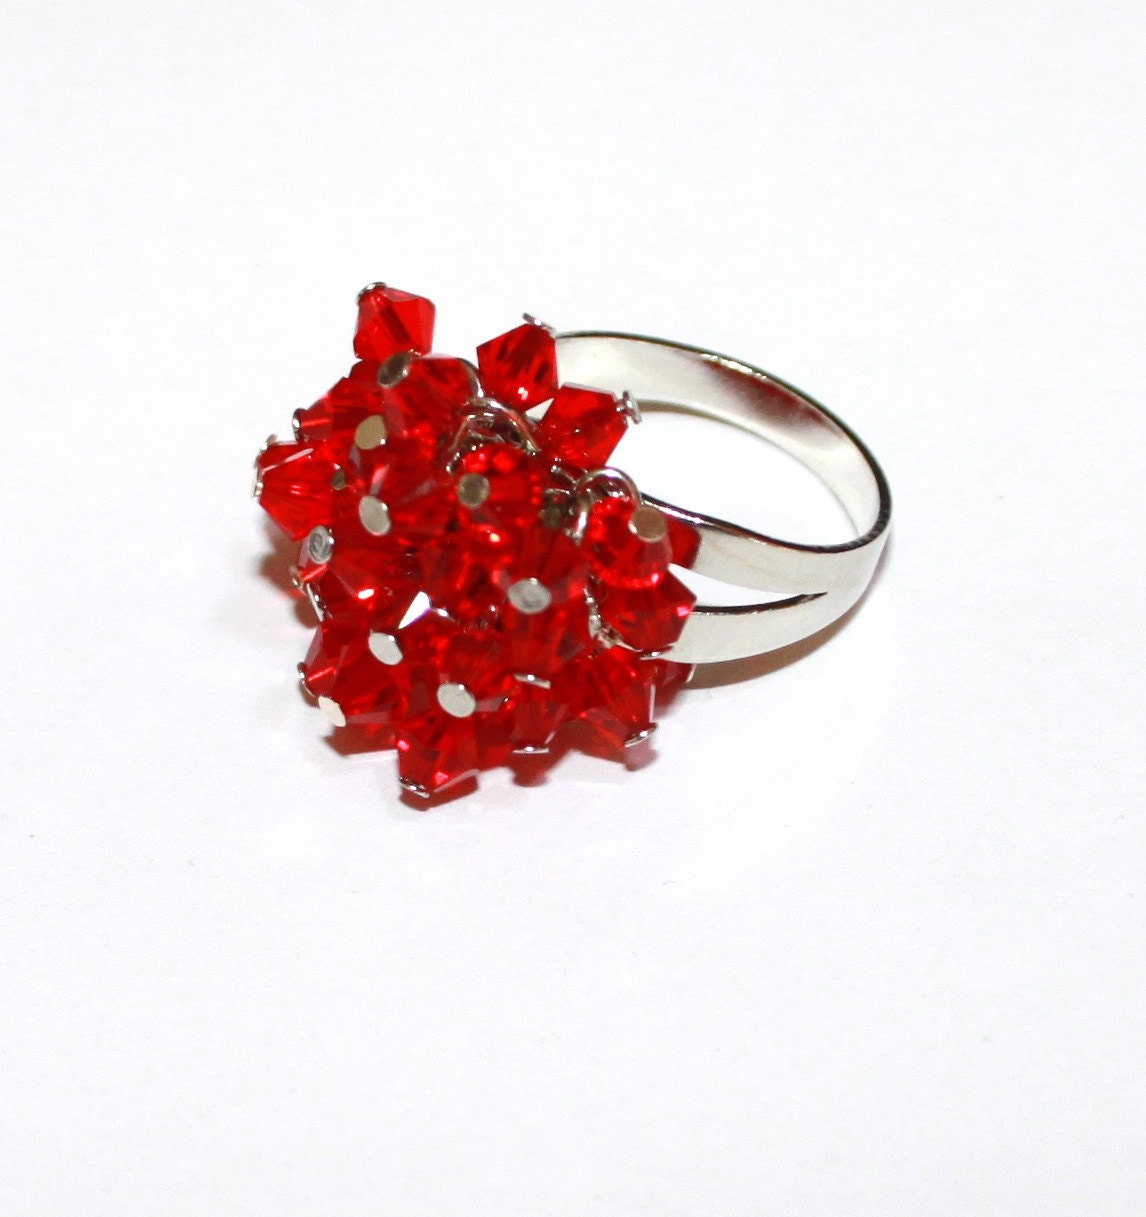 Beaded ring made from Swarovski crystal beads (Red Siam) - LesCreationsDeSarah